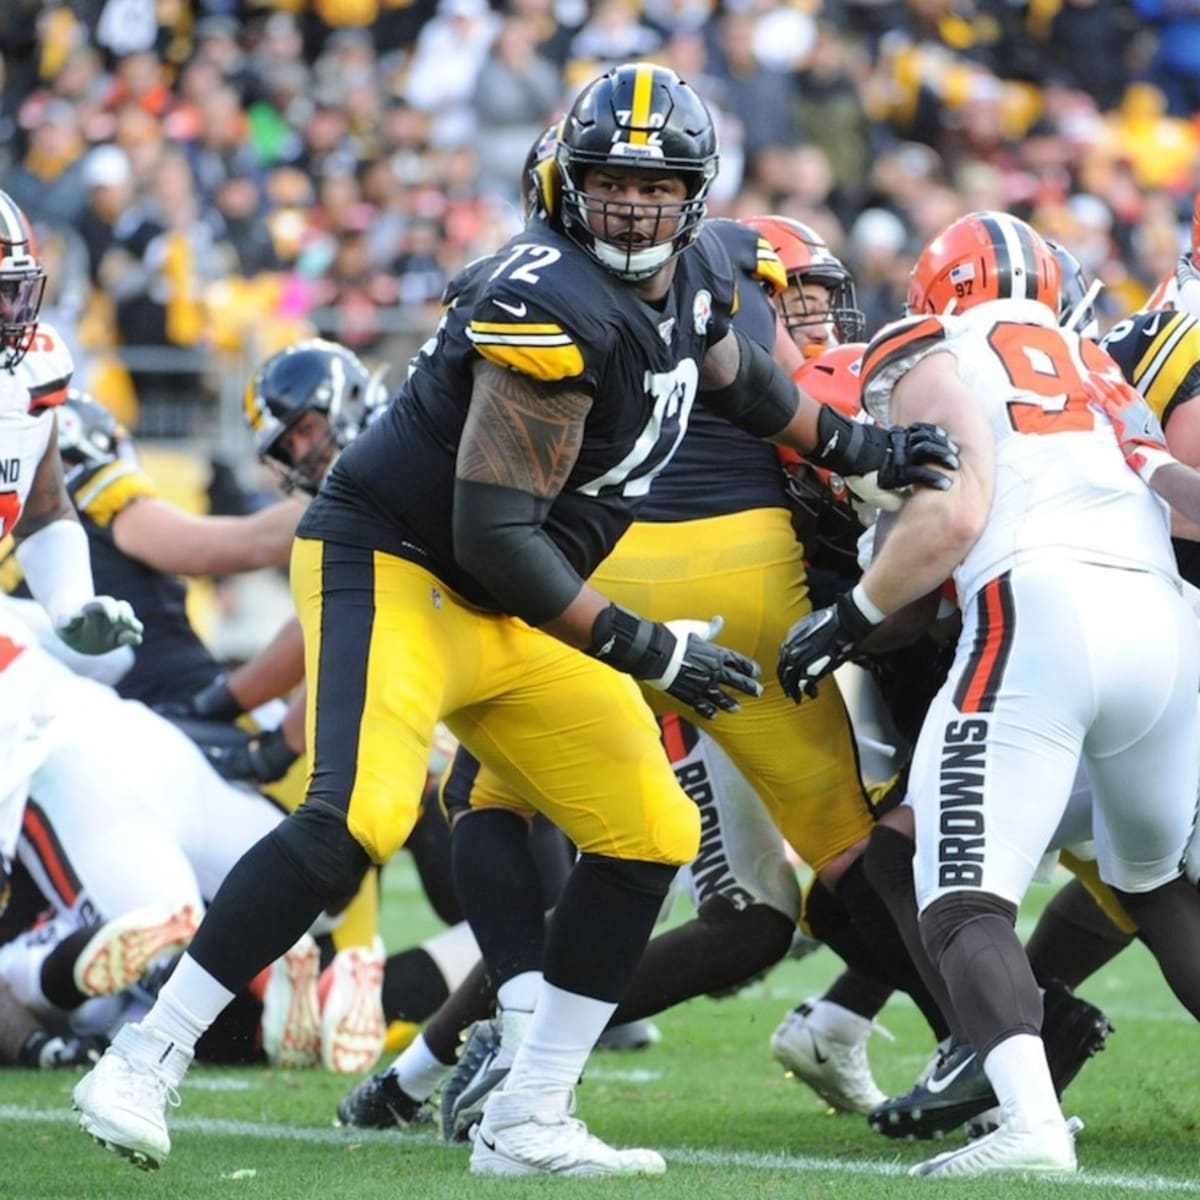 Steelers OL Zach Banner's shines in NFL Shop ad